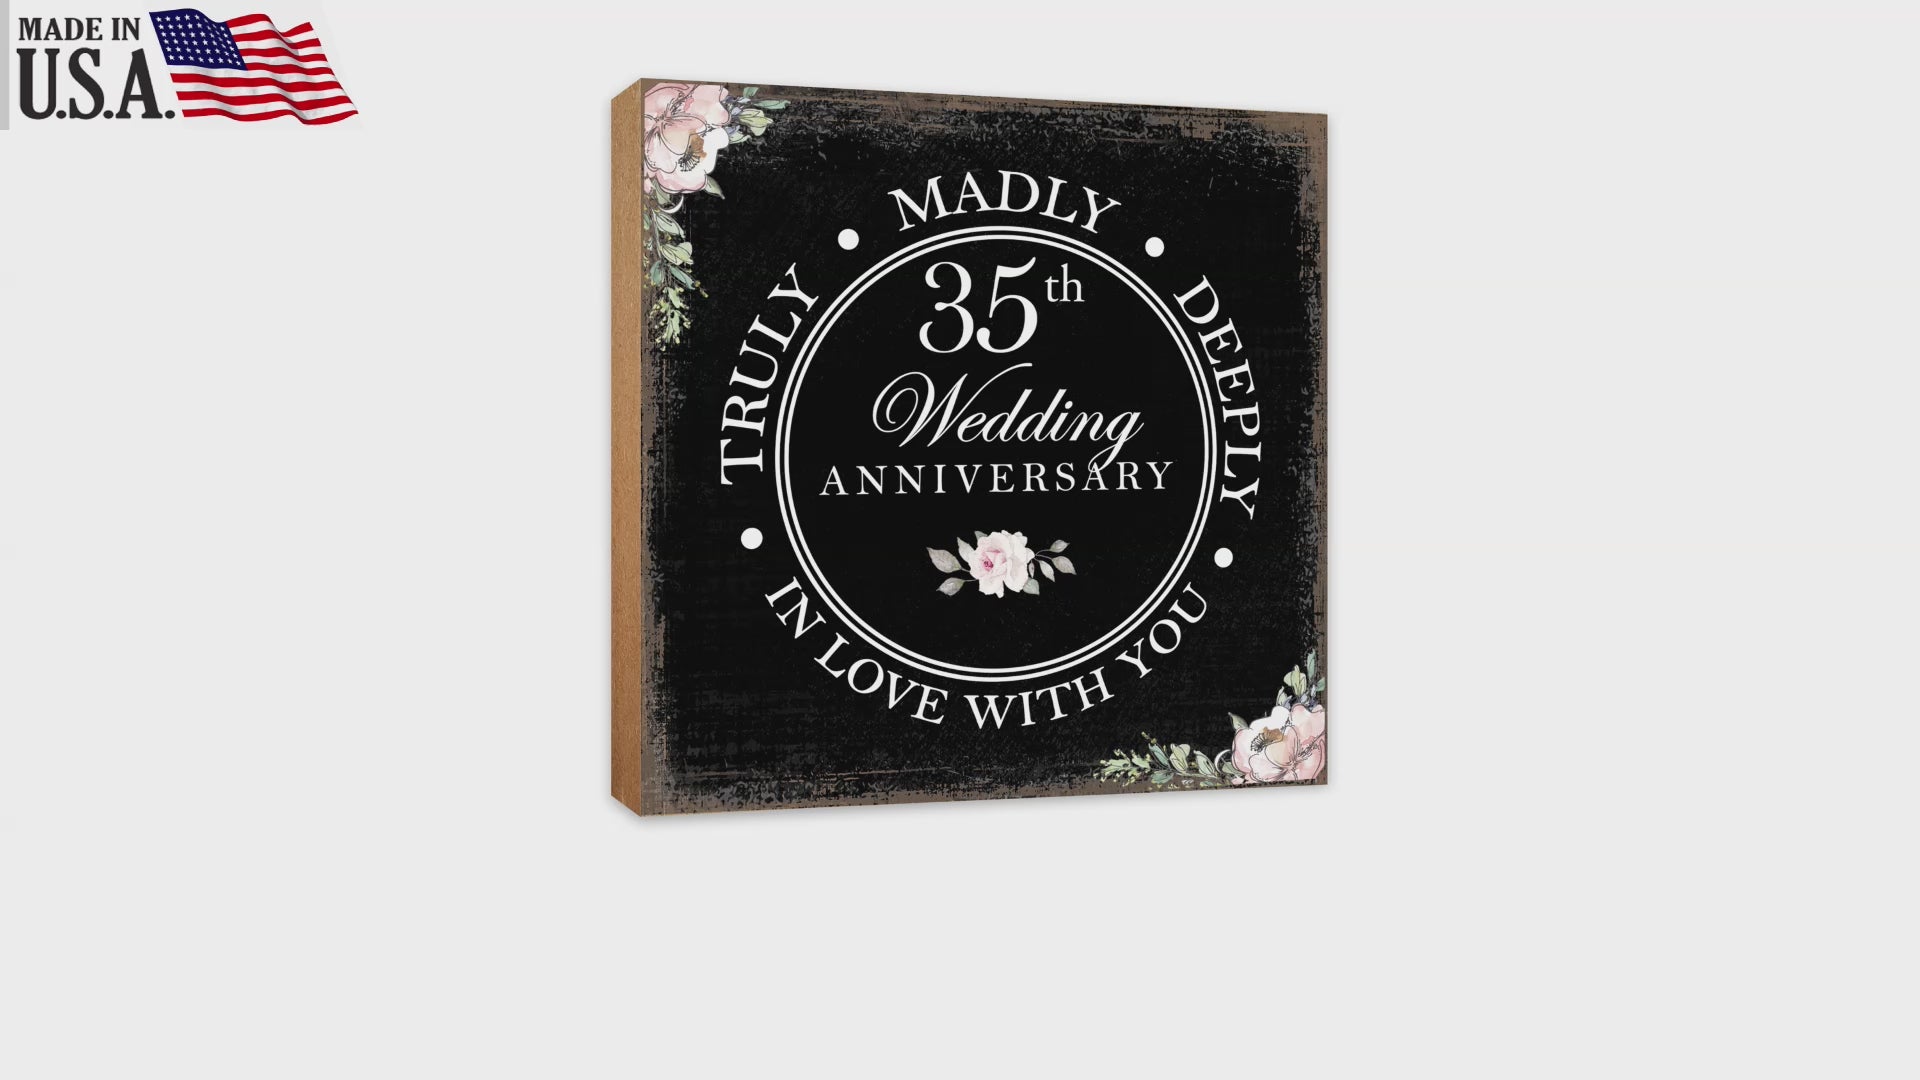 35th Wedding Anniversary Unique Shelf Decor and Tabletop Signs Gift for Couples - In Love With You - LifeSong Milestones